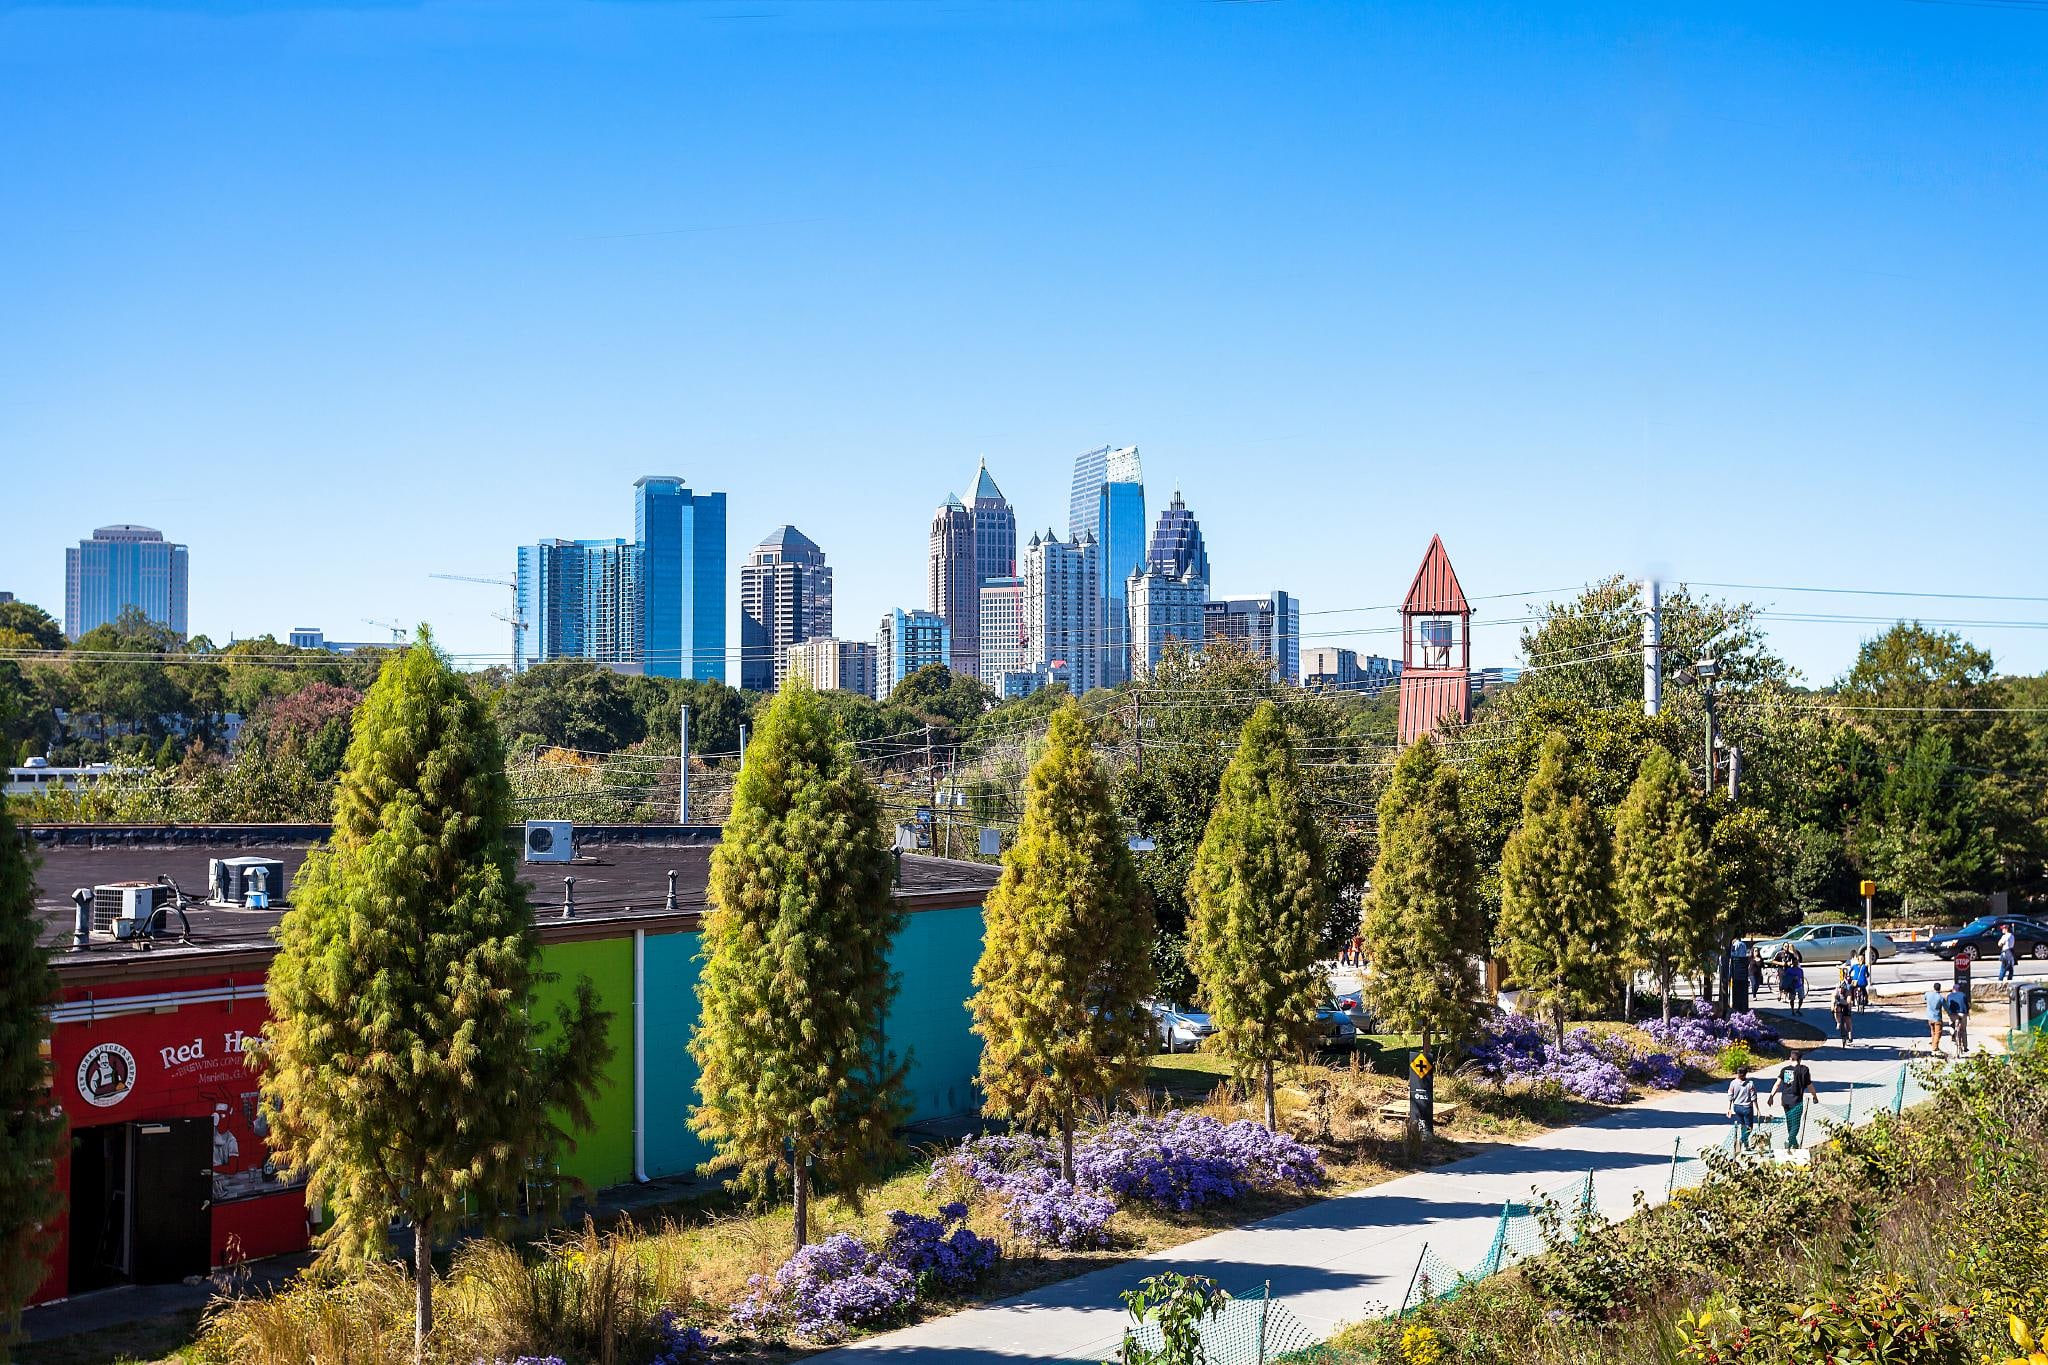 Beautiful Atlanta BeltLine with the trees and the Atlanta skyline at the background